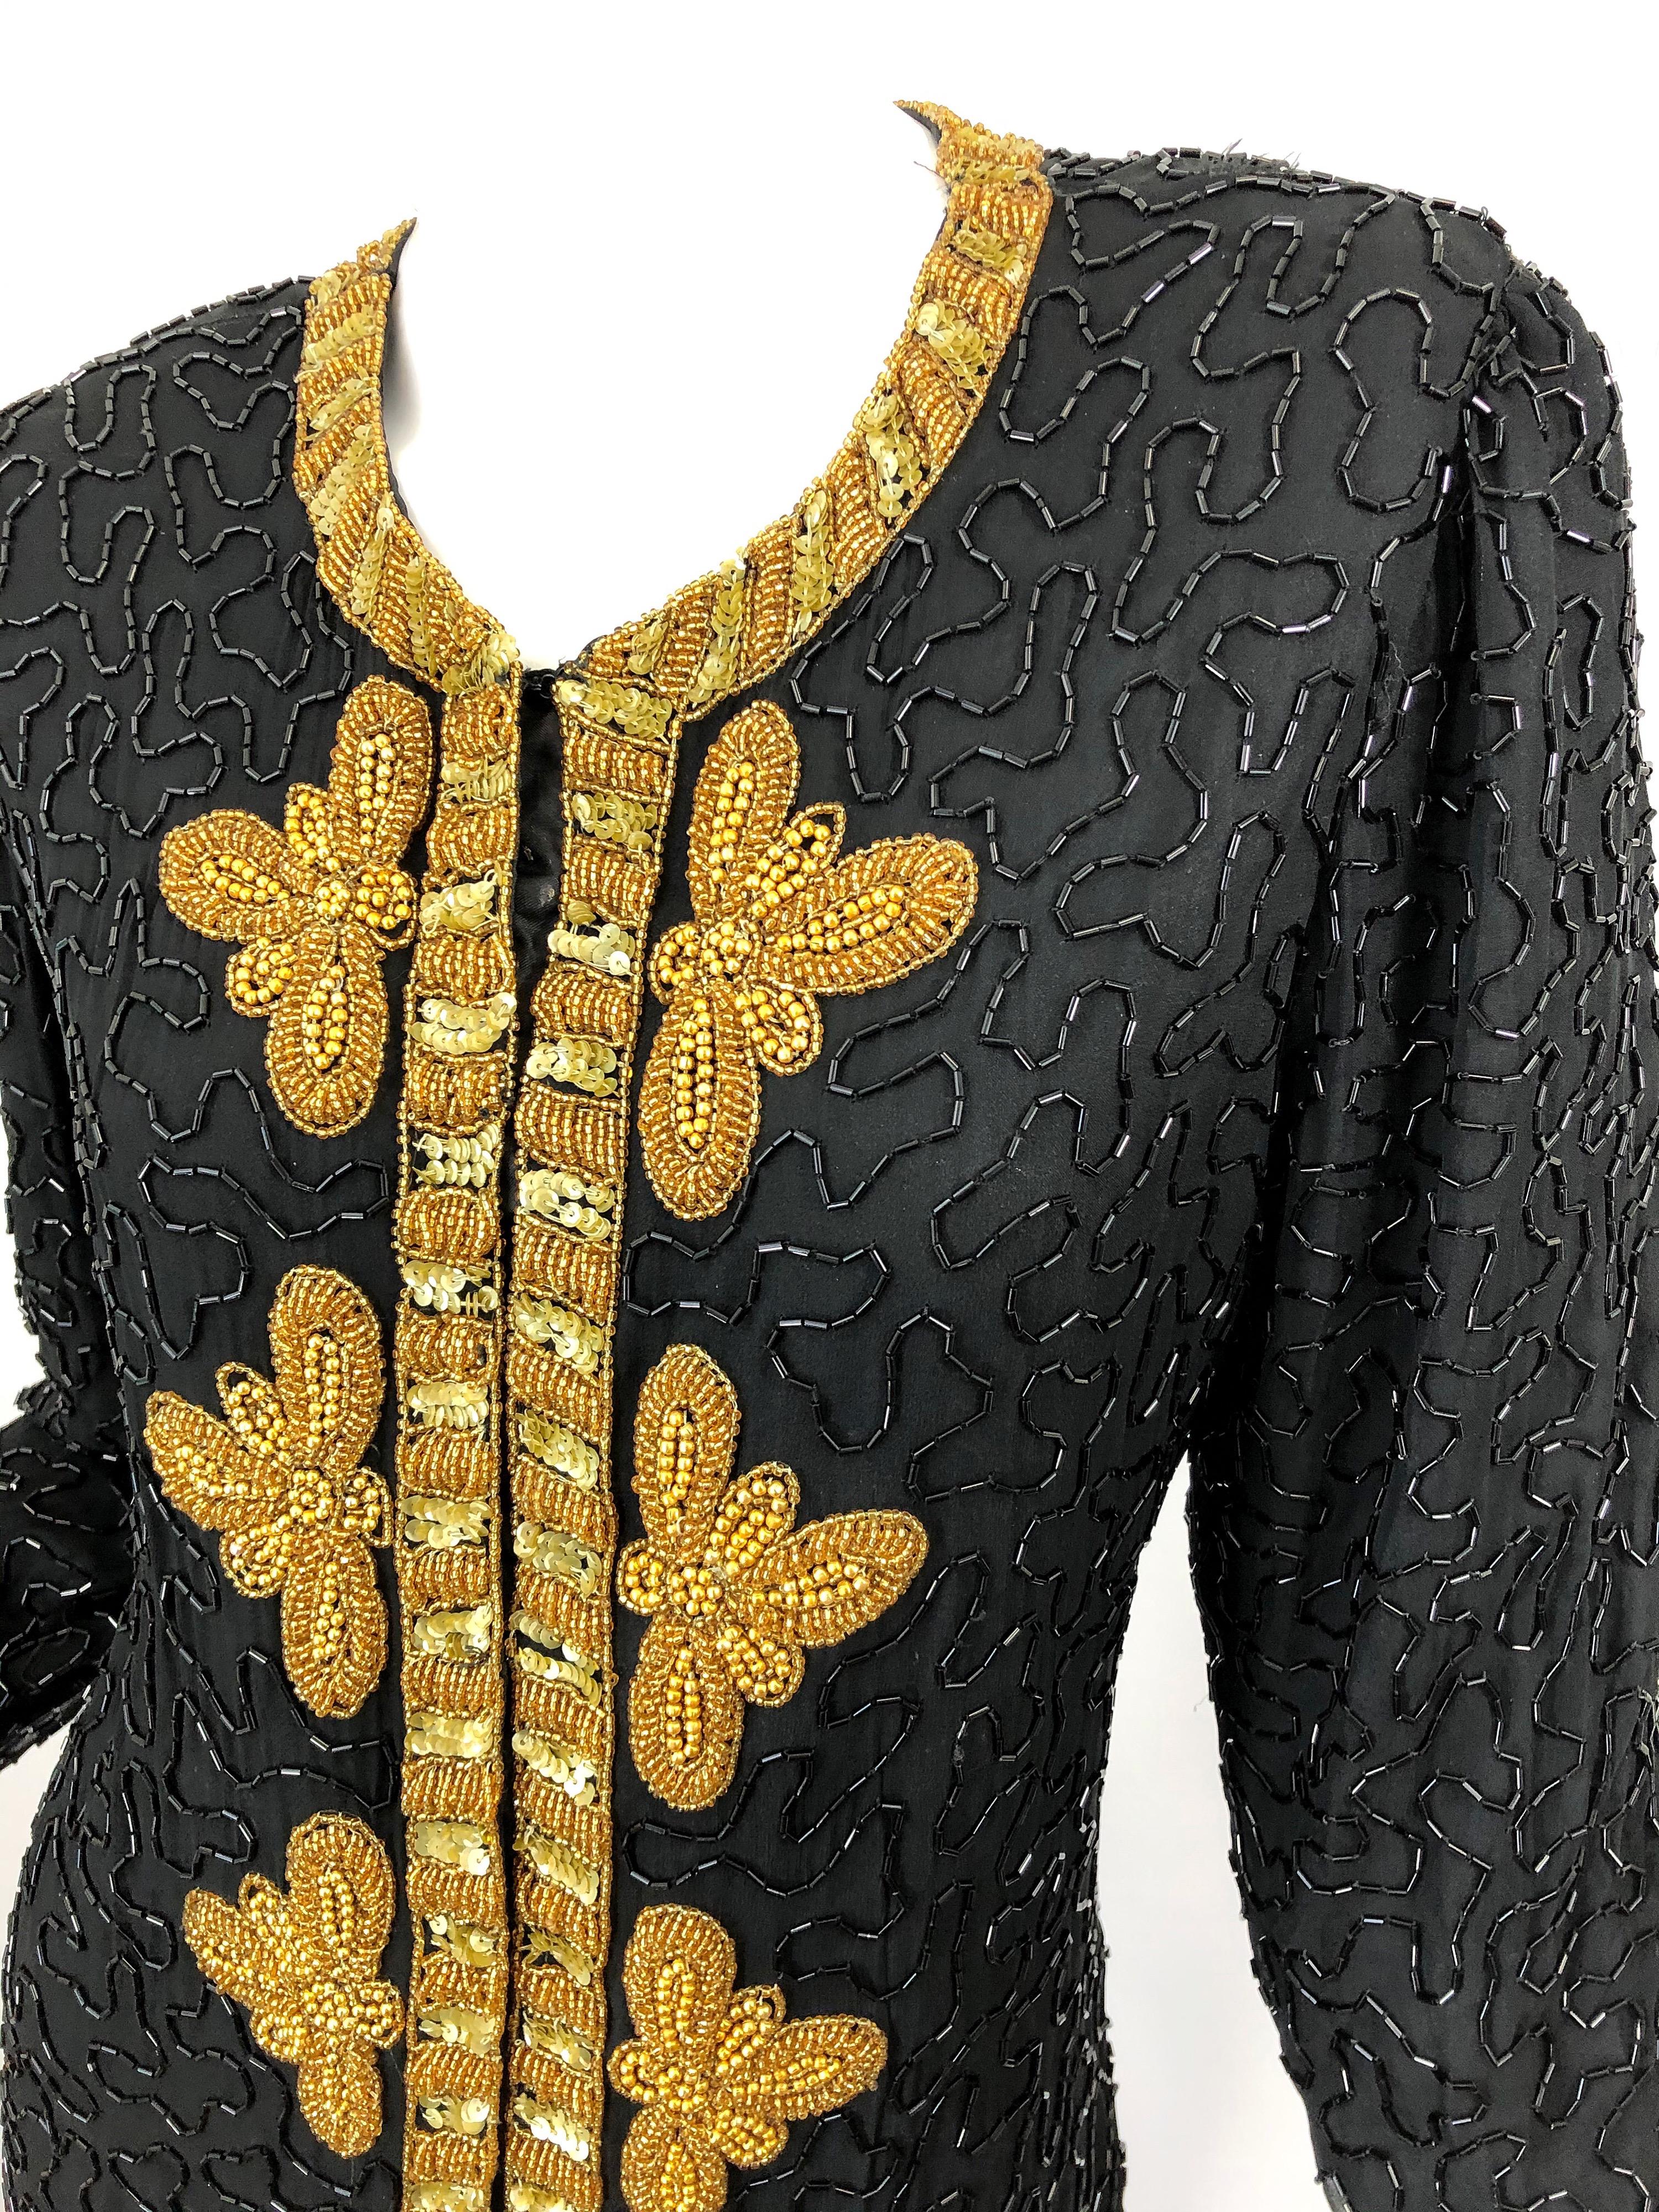 1990s Size Large Black and Gold Beaded Vintage Silk Chiffon 90s Jacket Top 6